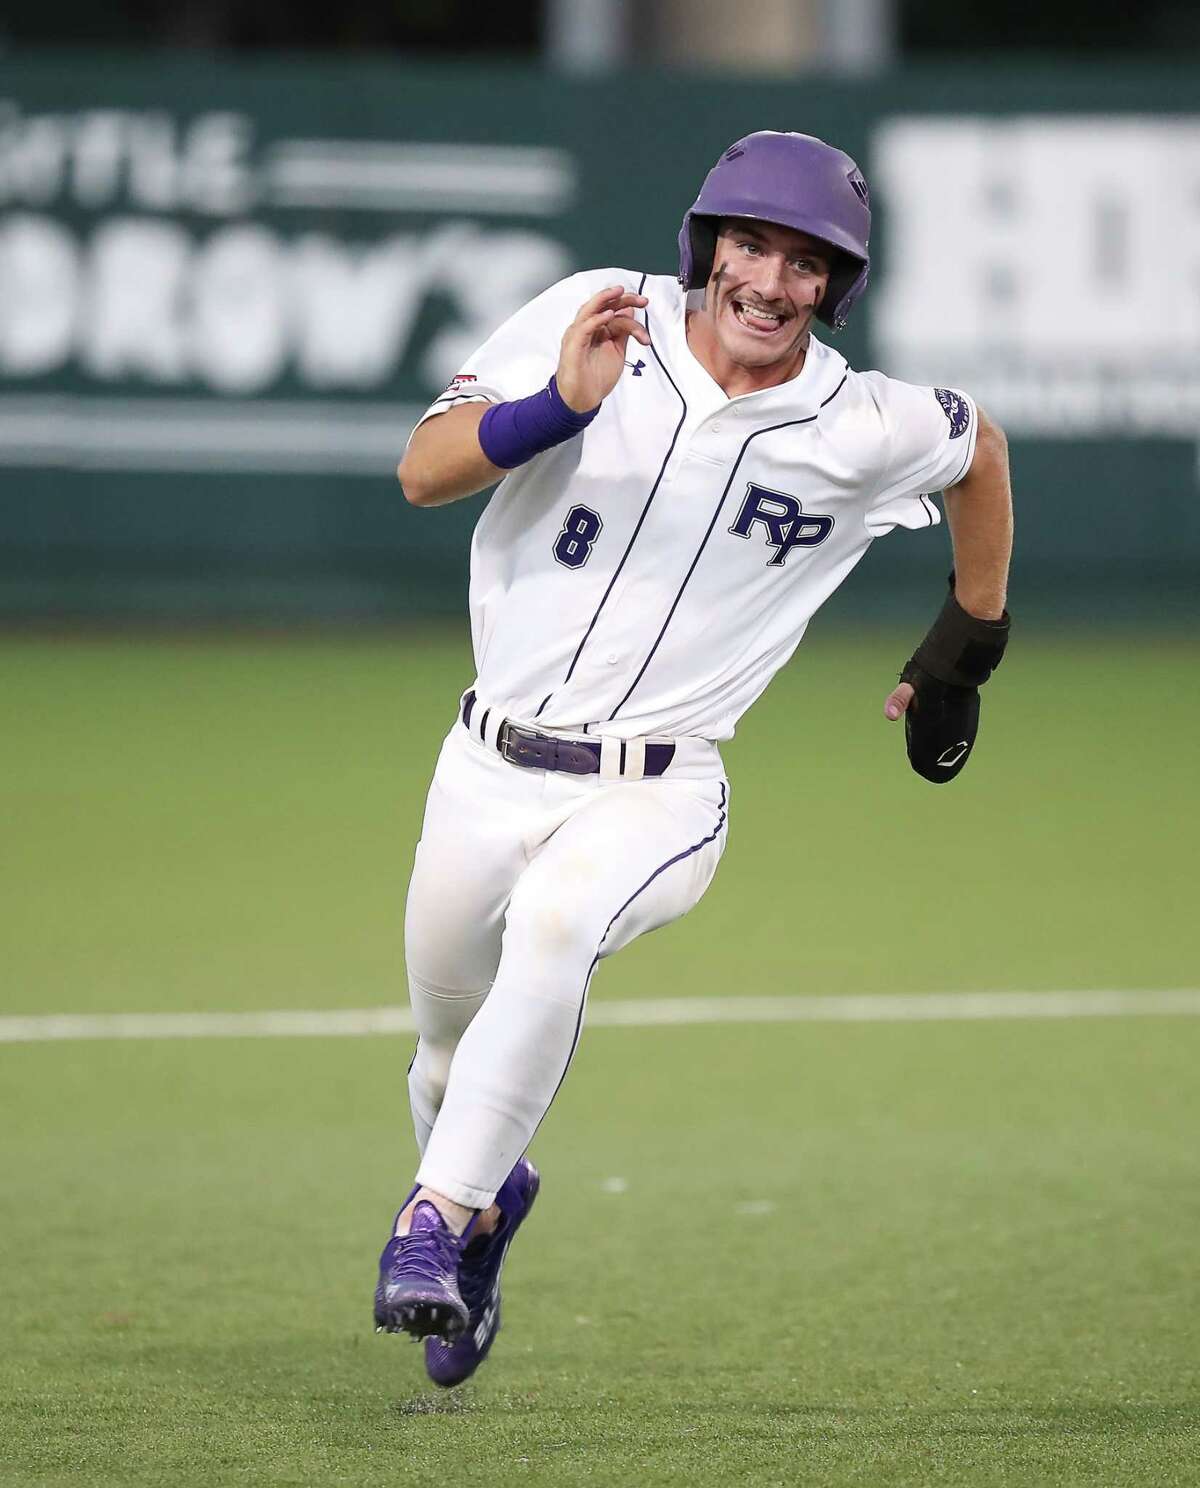 HOUSTON, TX - MAY 26: Ridge Point’s Justin Vossos #8 scores on a double by Travis Vlasek in the fifth inning against Pearland during a Region III 6-A semifinals, Game 1 high school baseball game between Ridge Point and Pearland on May 26, 2022 at Schroeder Park on the University of Houston in Houston, Texas. (Photo by Bob Levey/Contributor)